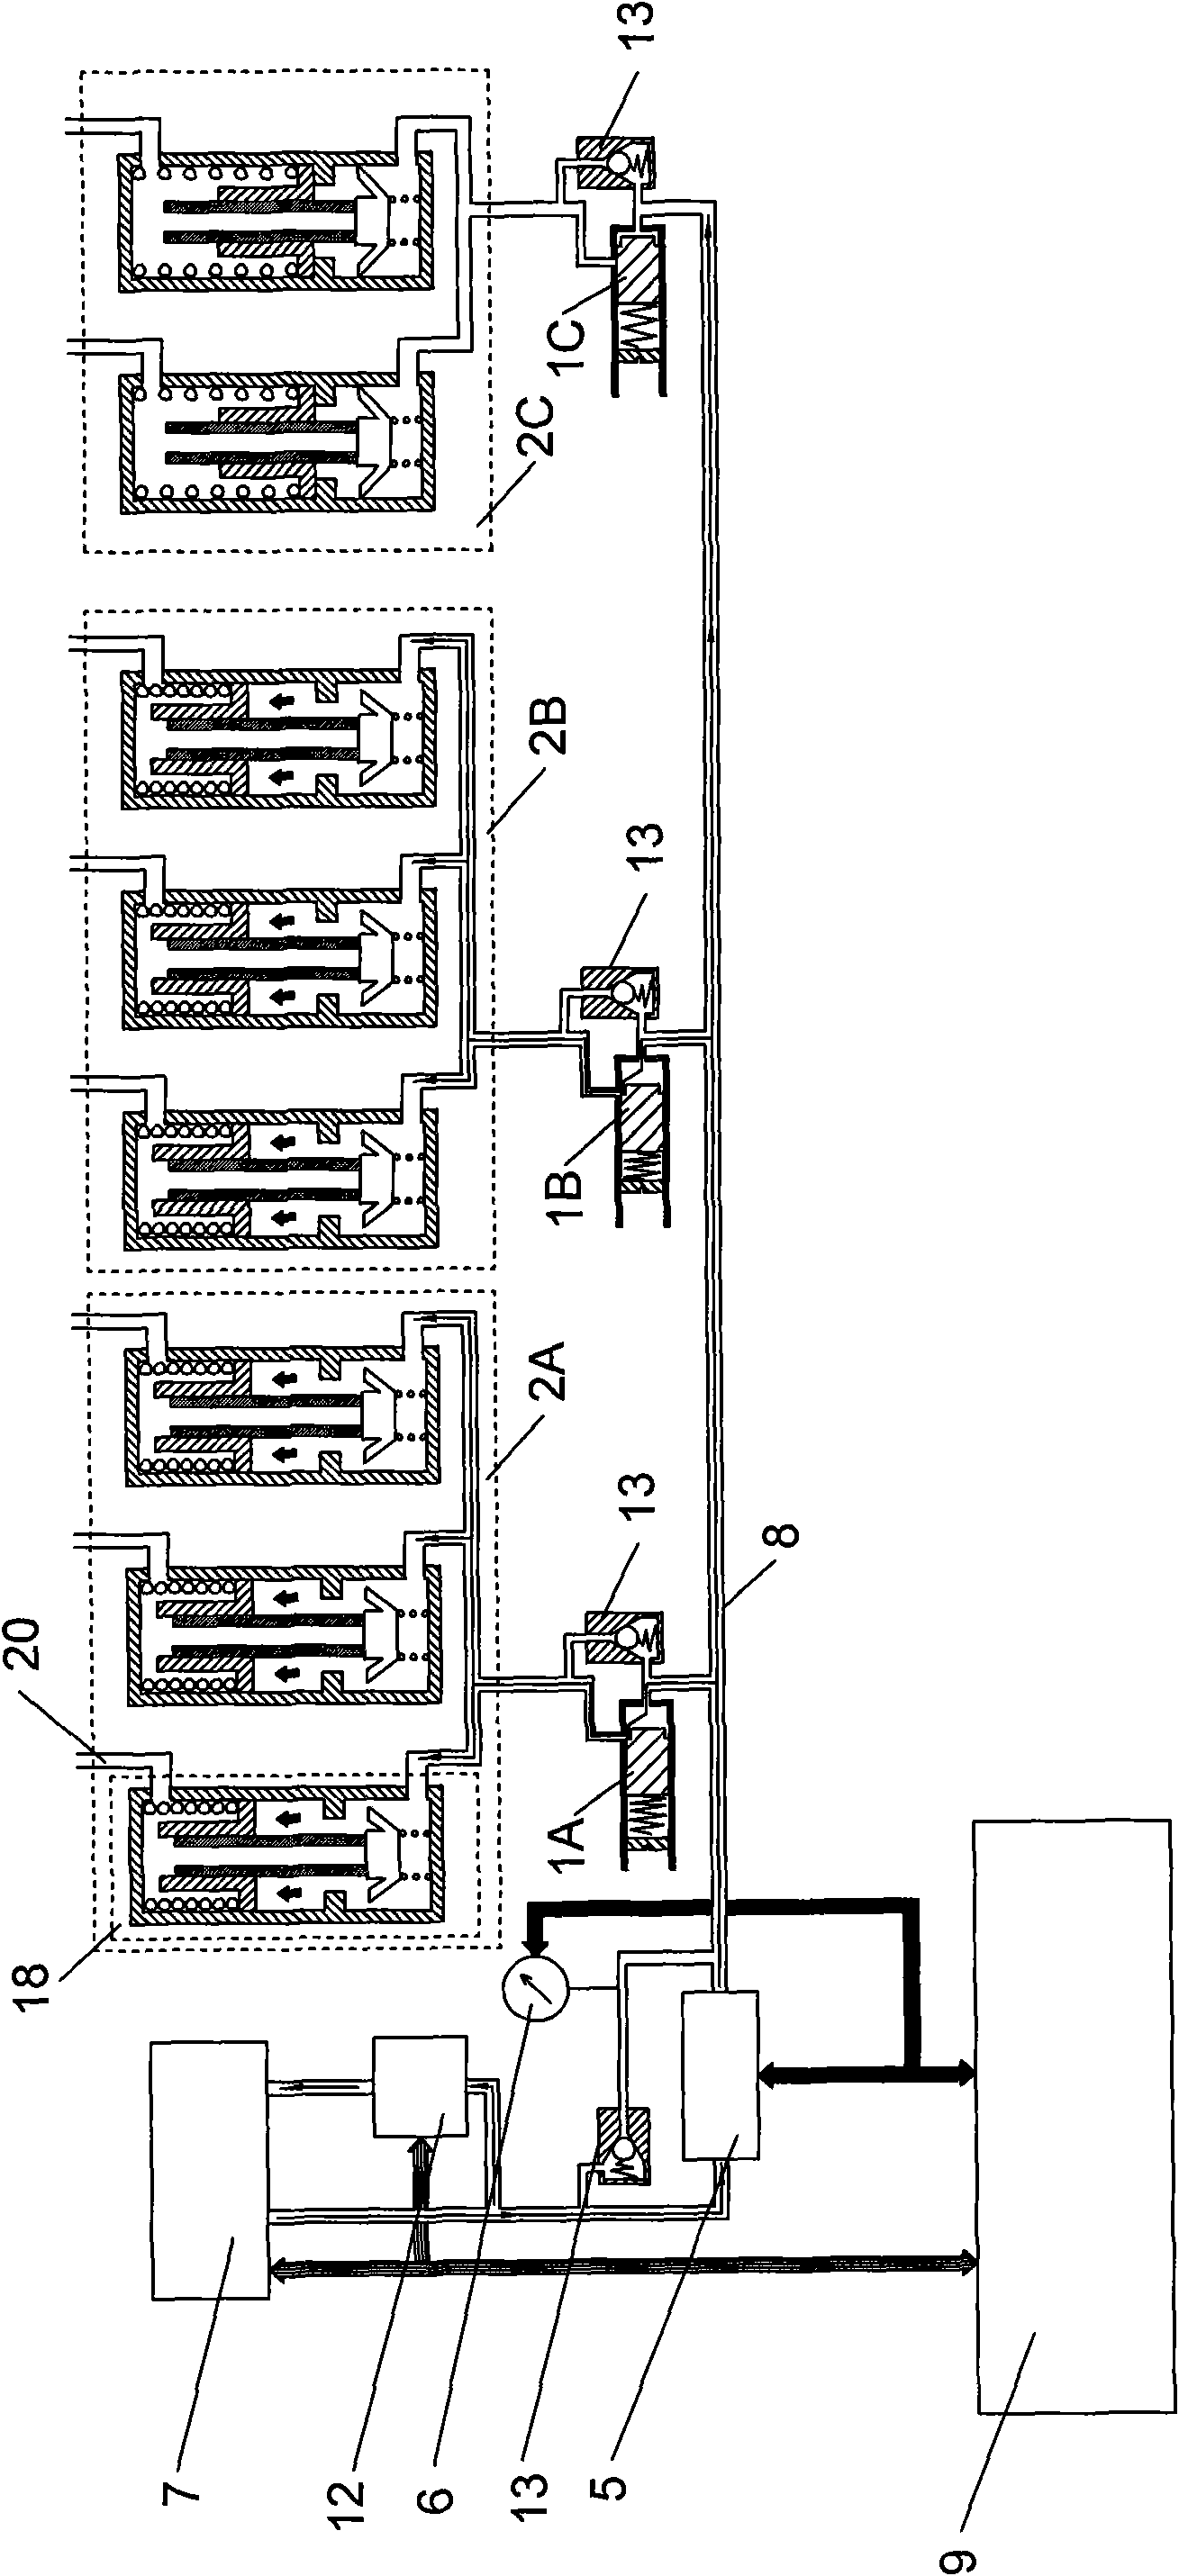 Method for monitoring lubricant distribution system and lubricant distribution system using same